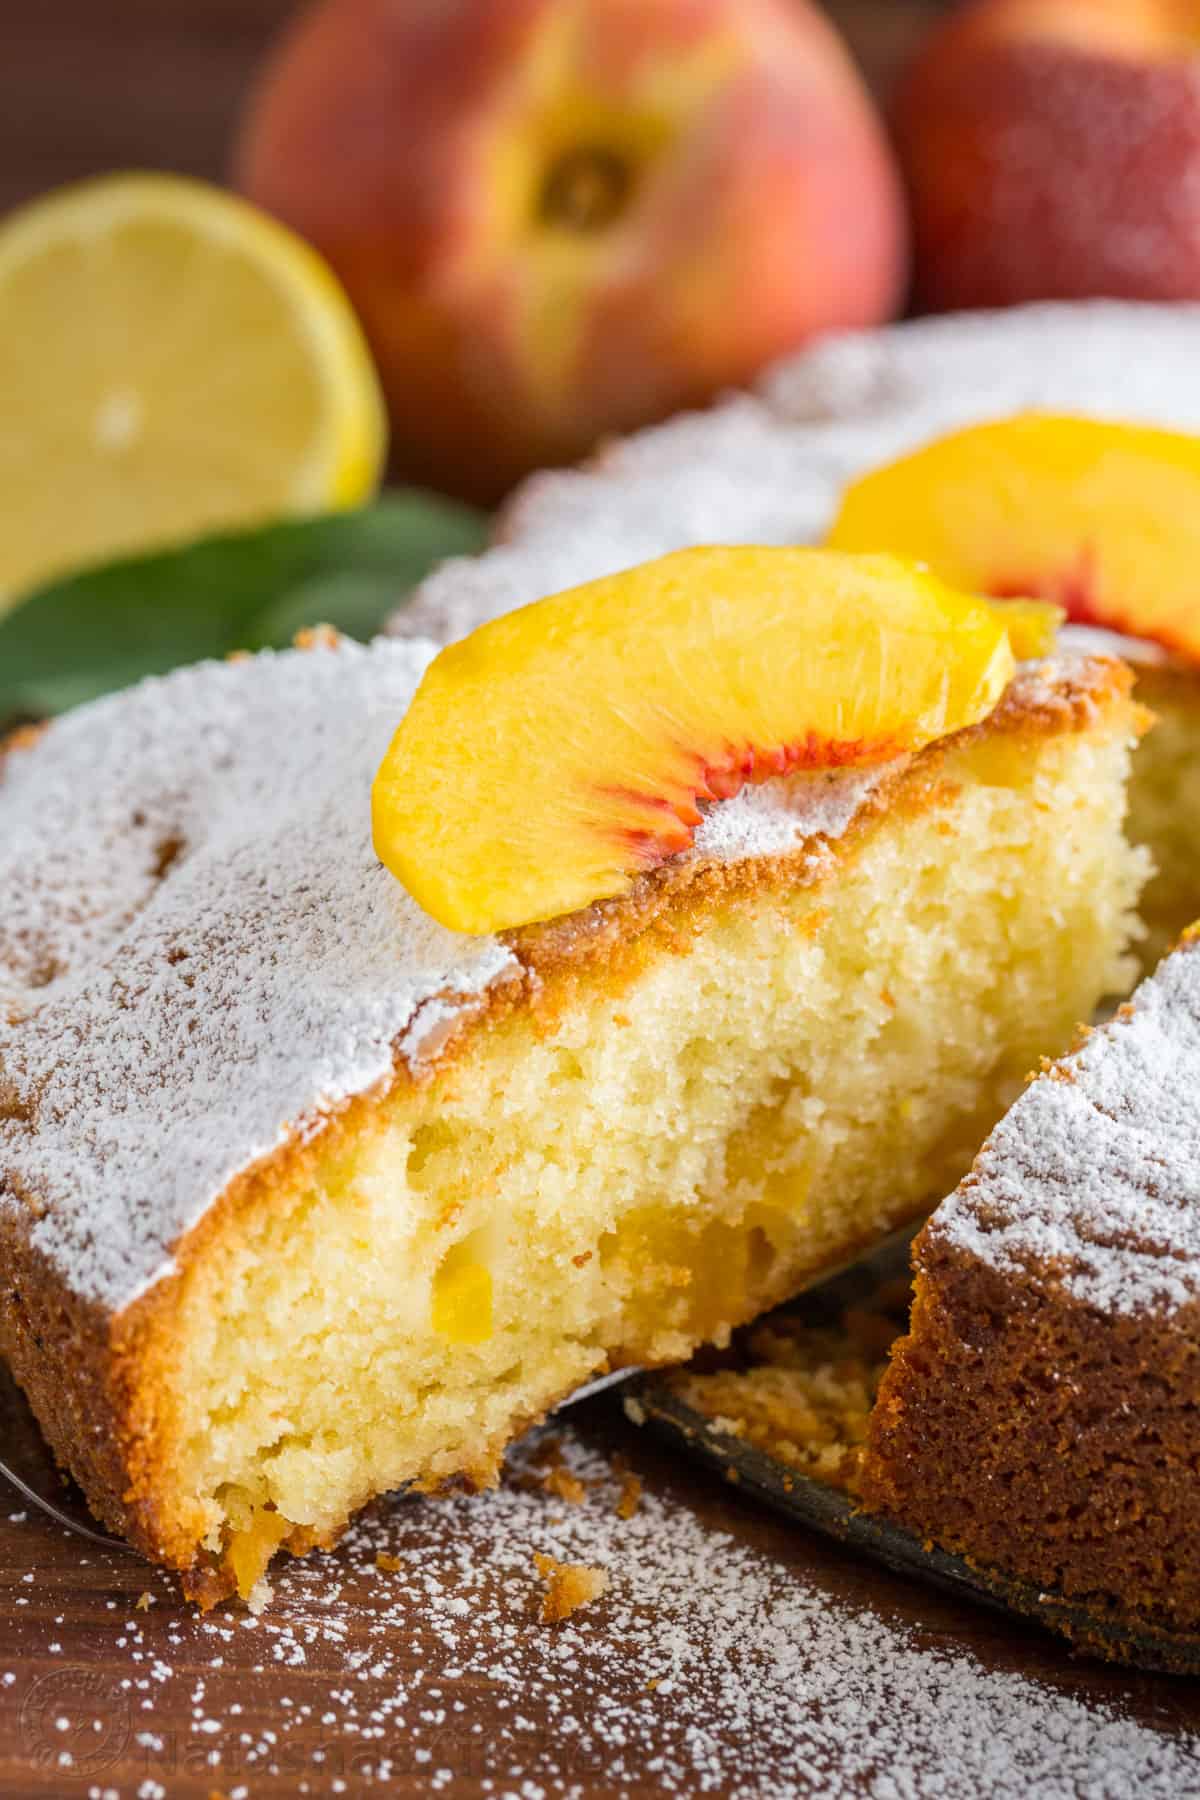 Slice of summer peach cake dusted with confectioners' sugar and topped with fresh sliced peach